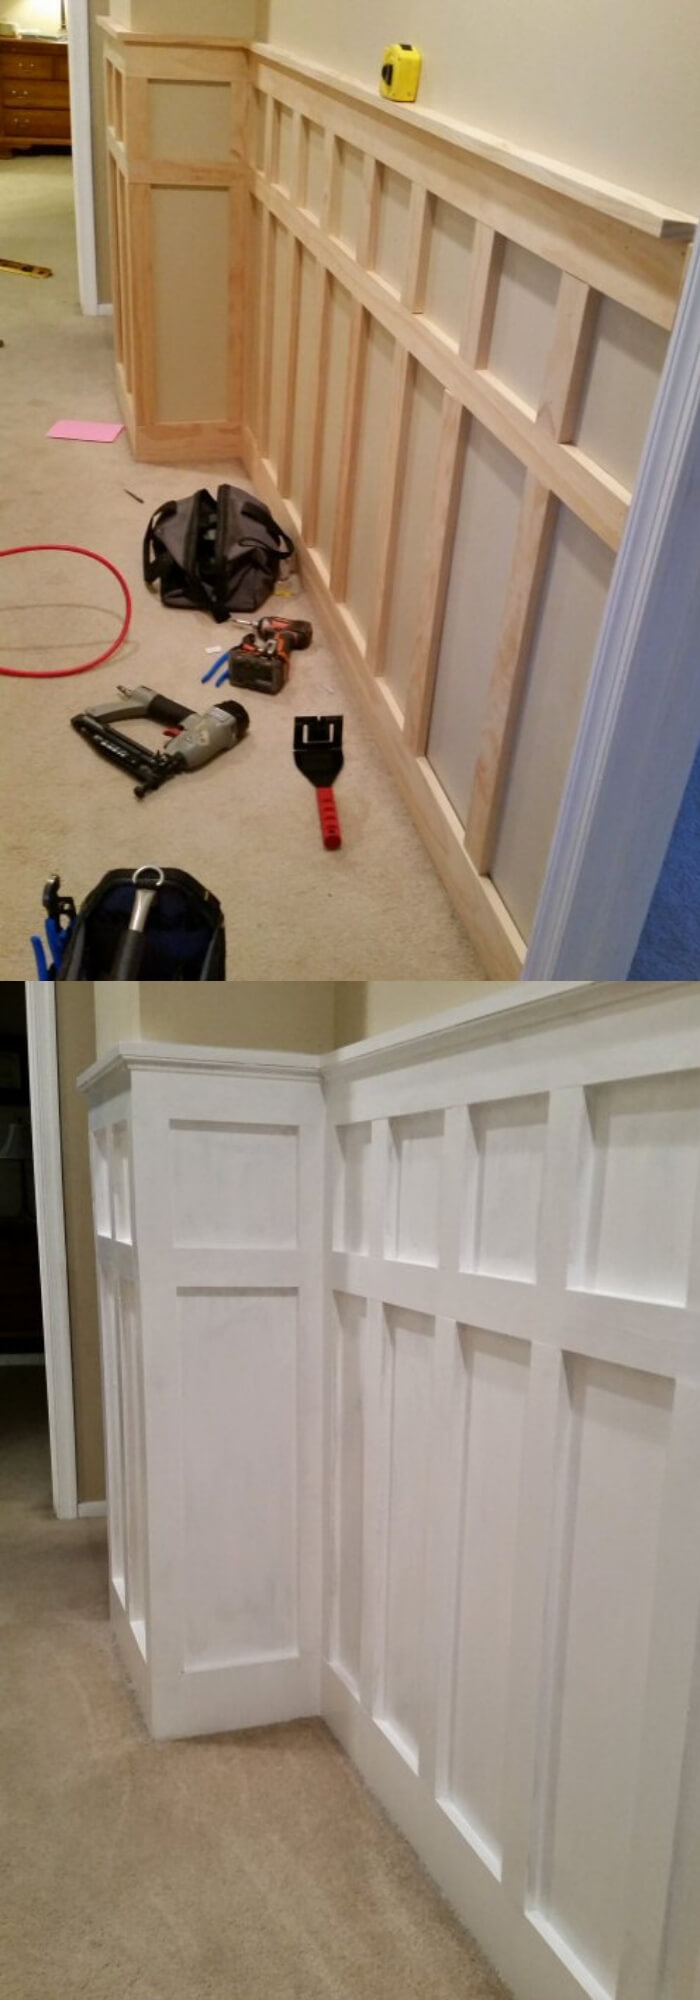 Board and Batten Wainscoting Hallway | Amazing Wainscoting Ideas for Your New Home